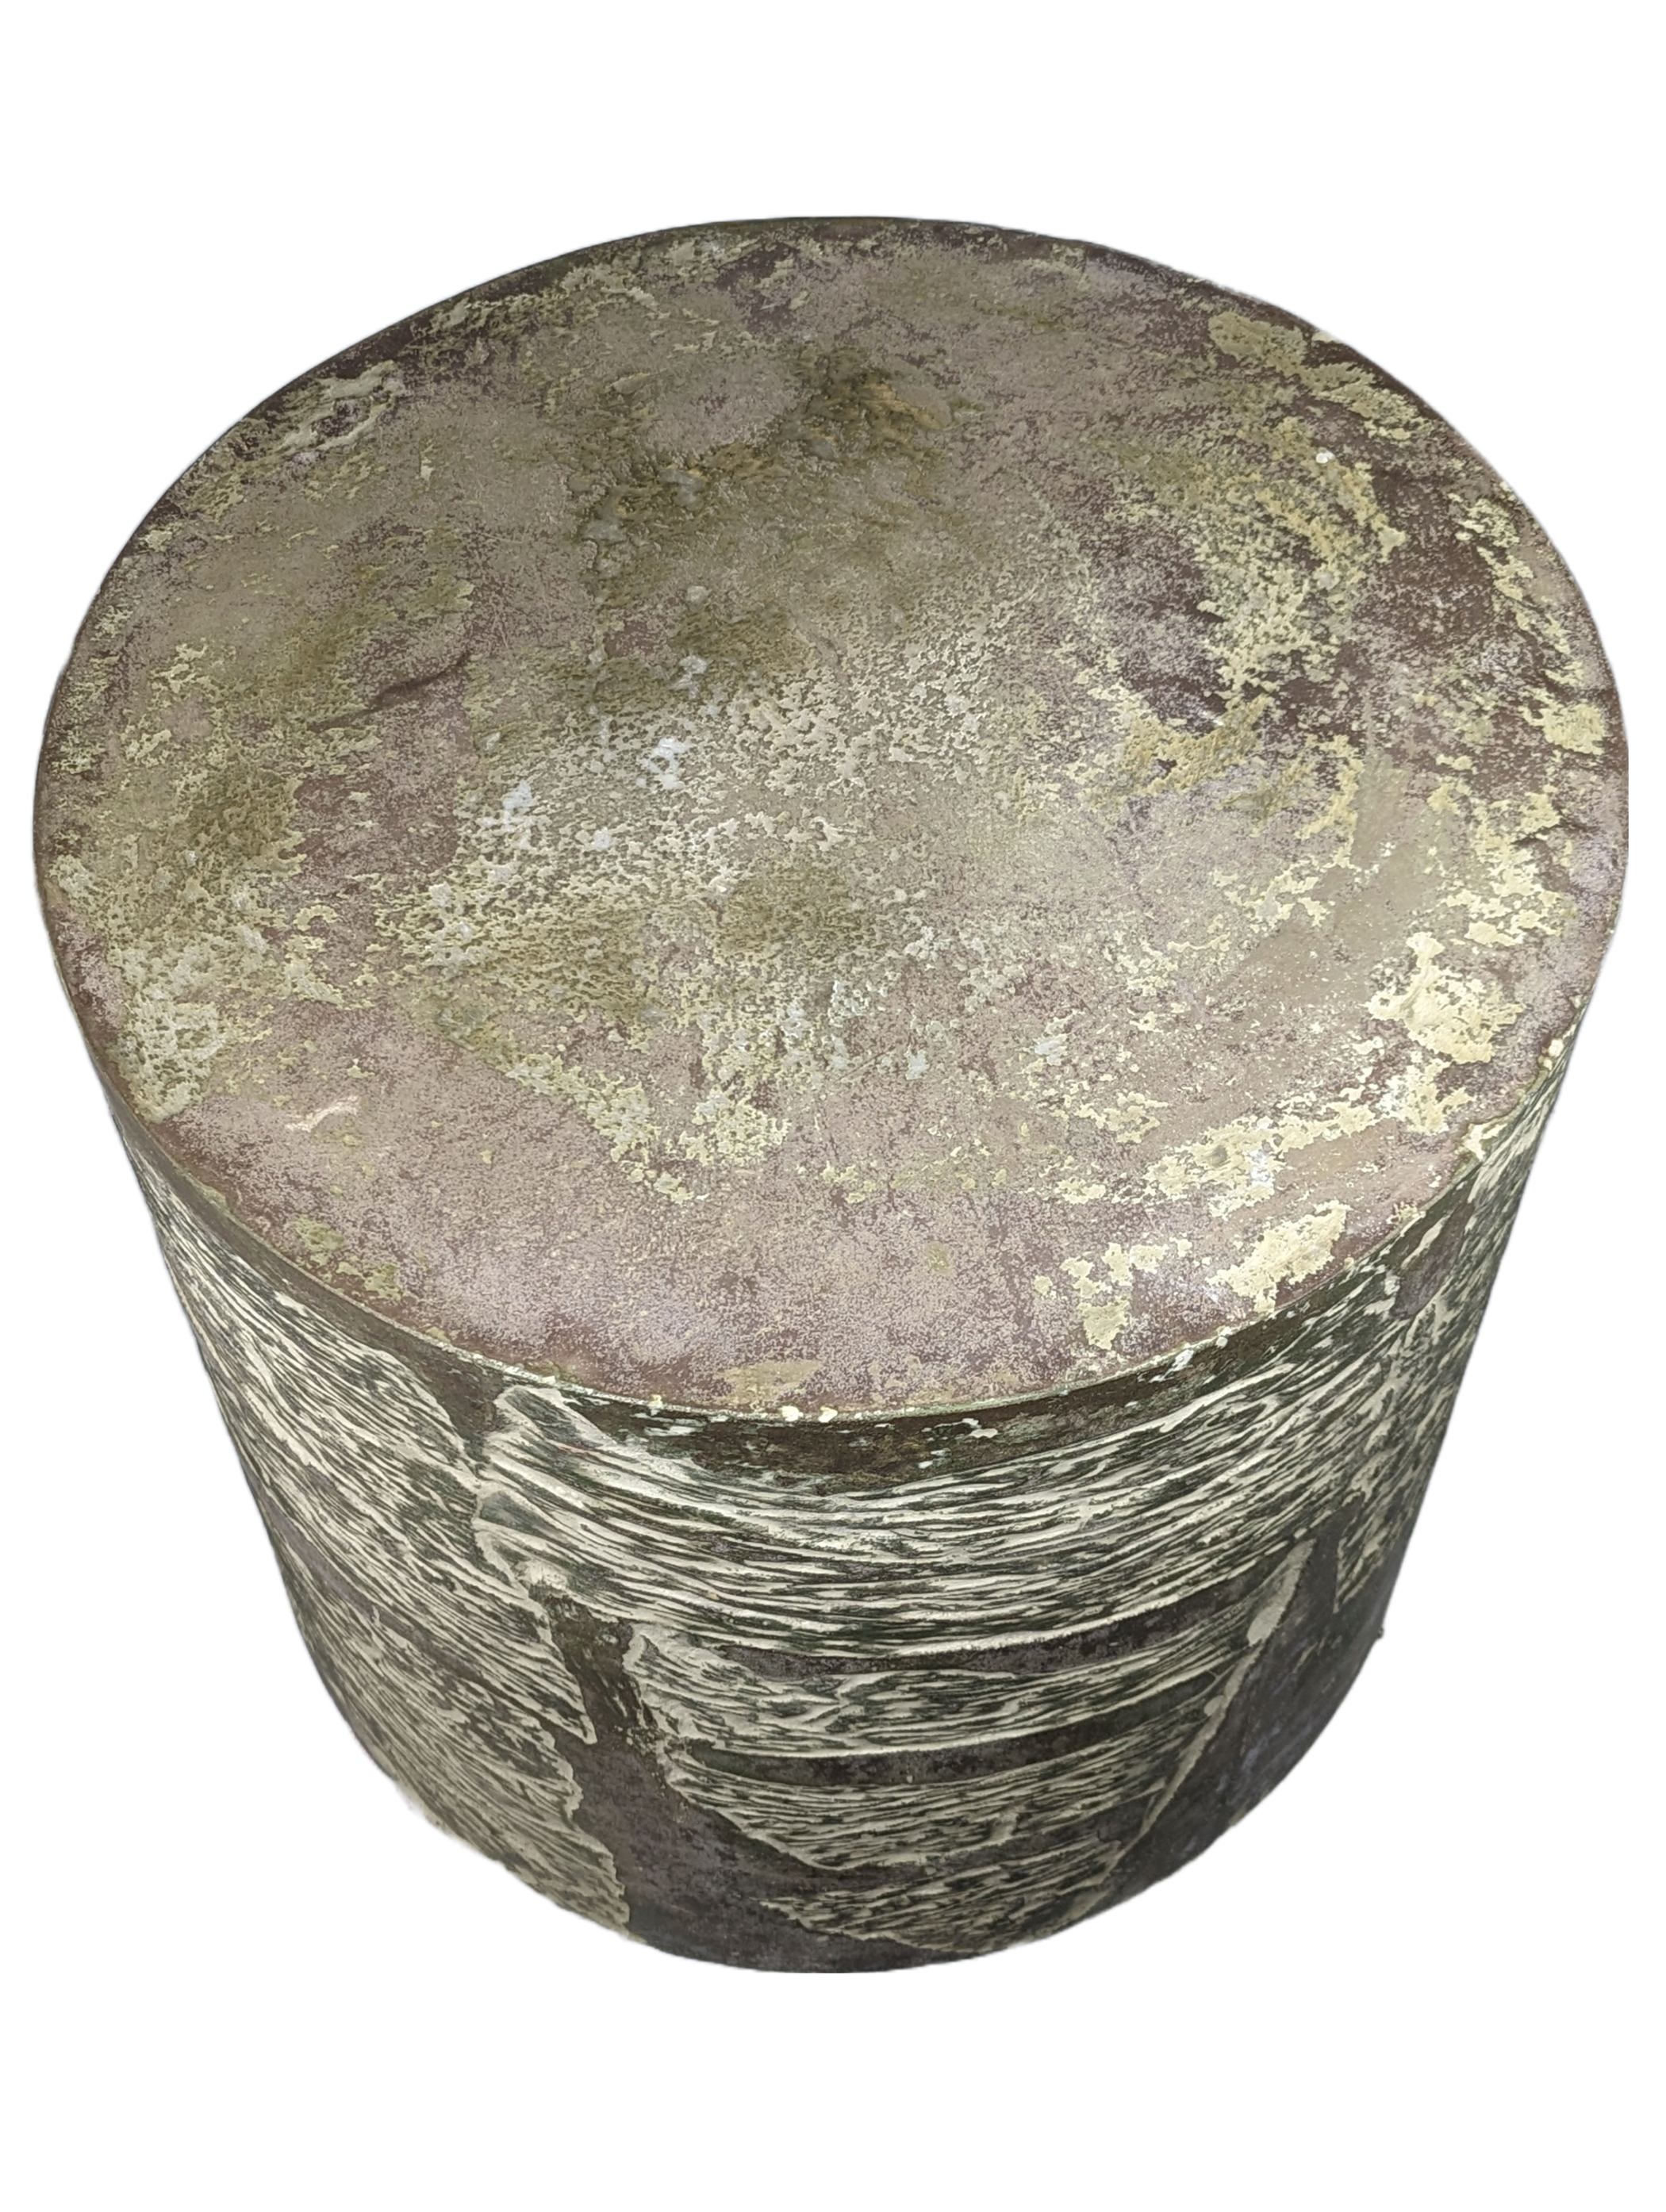 Concrete coffee table, round with mottled greens and browns on top and lines on side